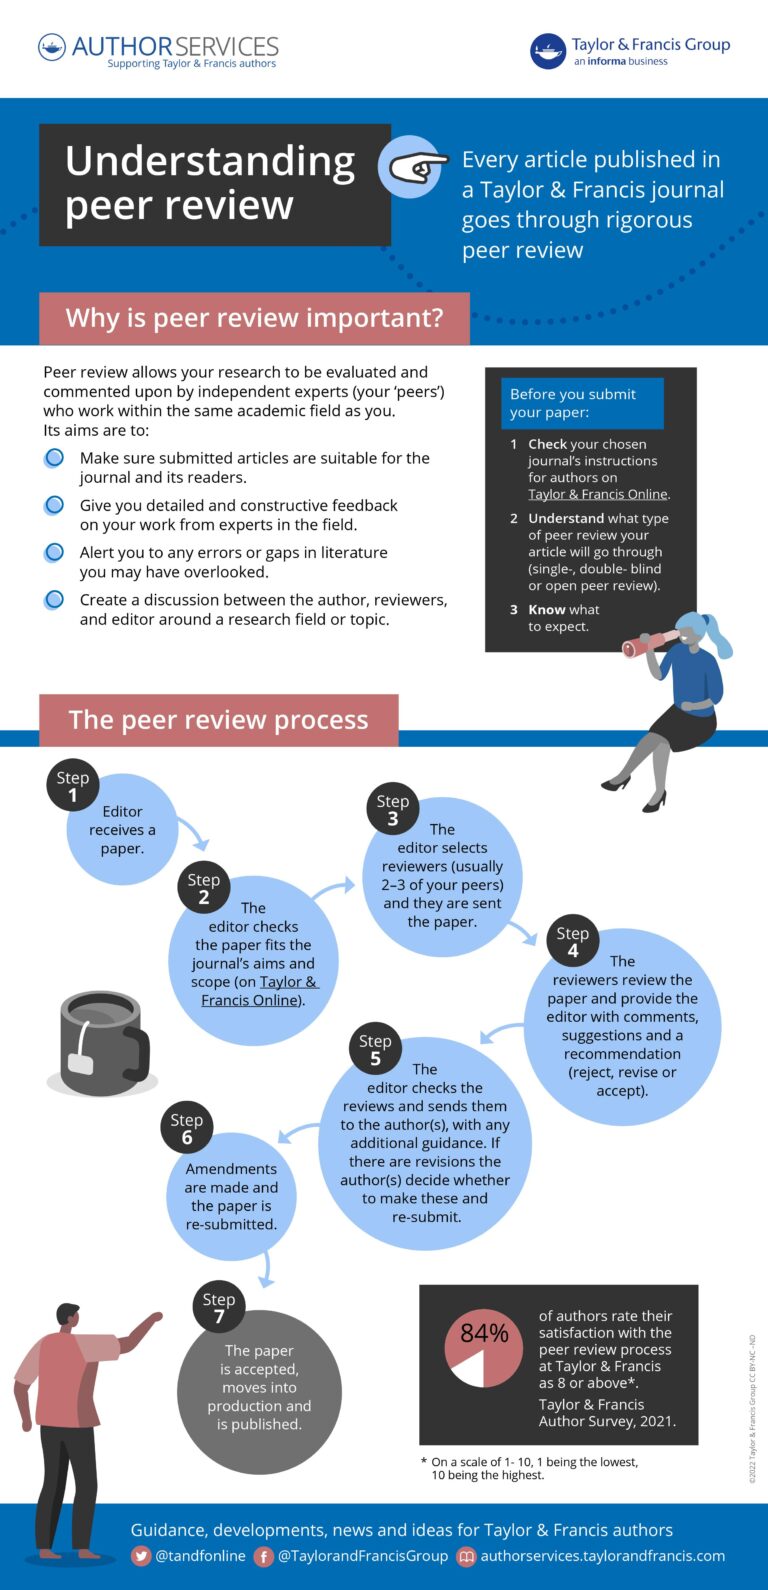 is peer review the same as literature review